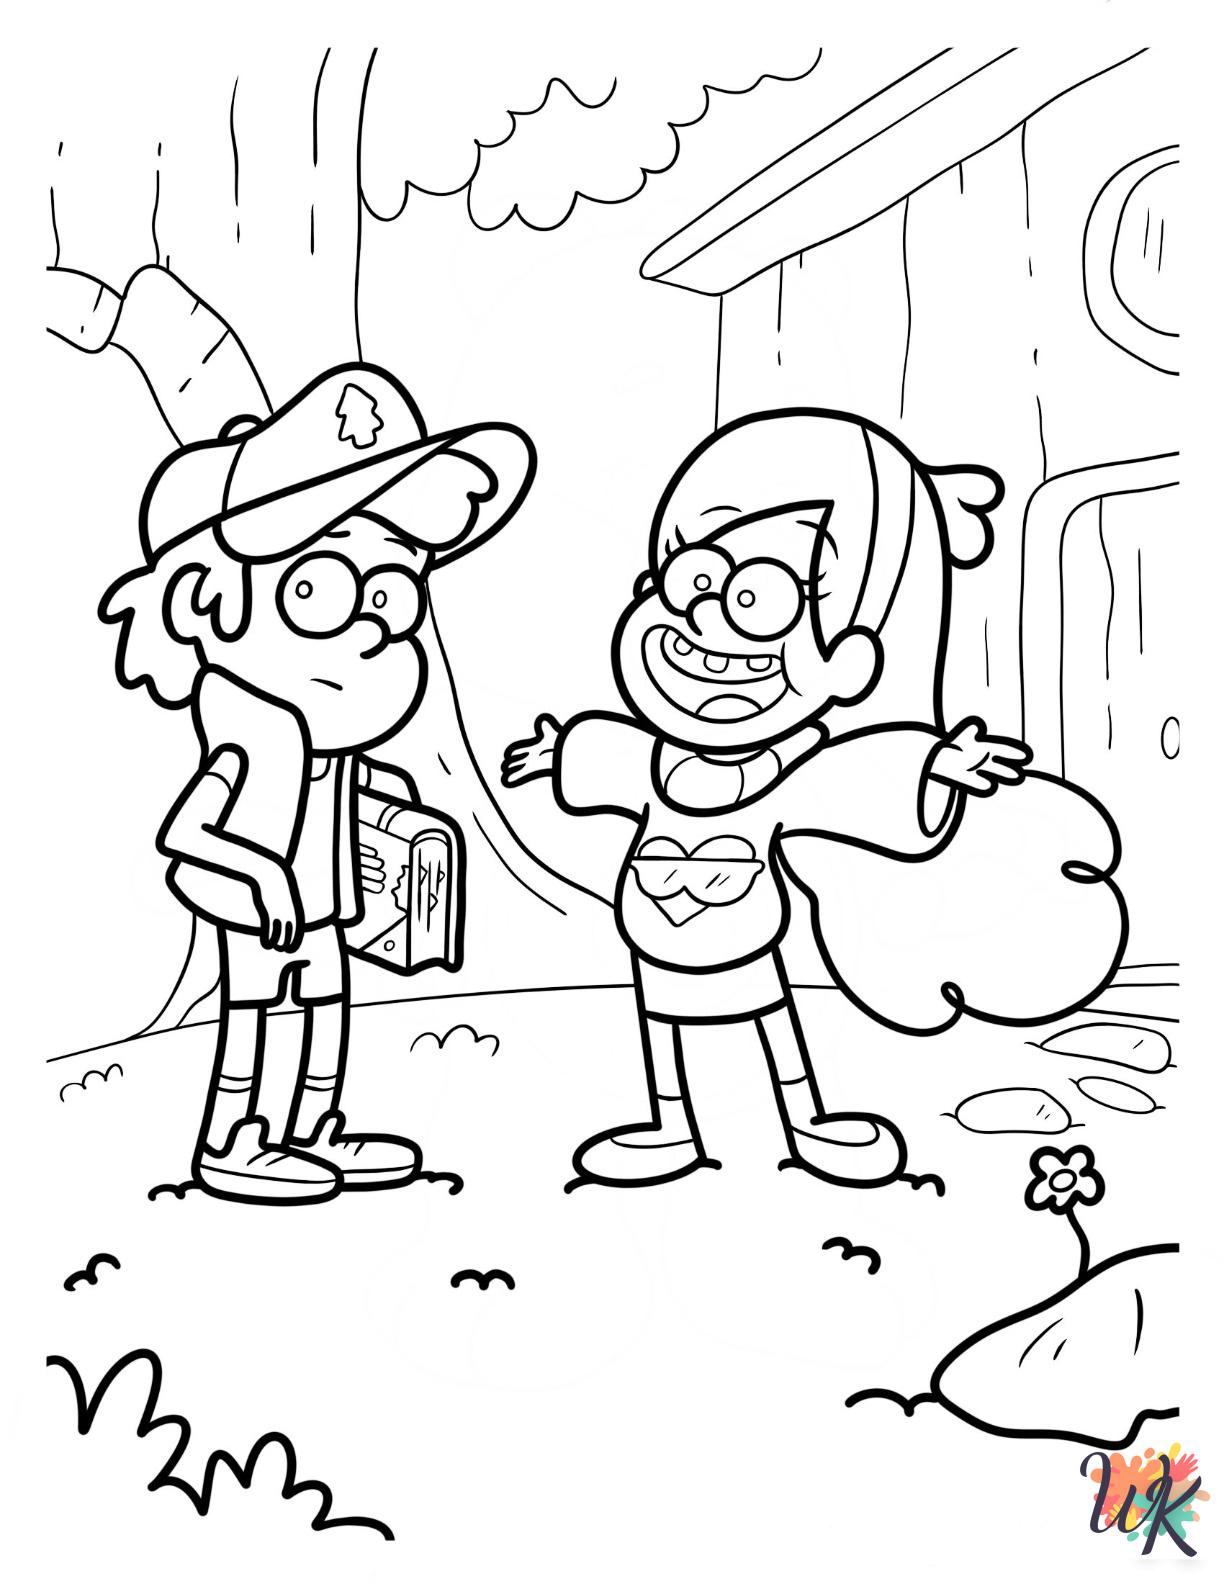 detailed Gravity Falls coloring pages for adults